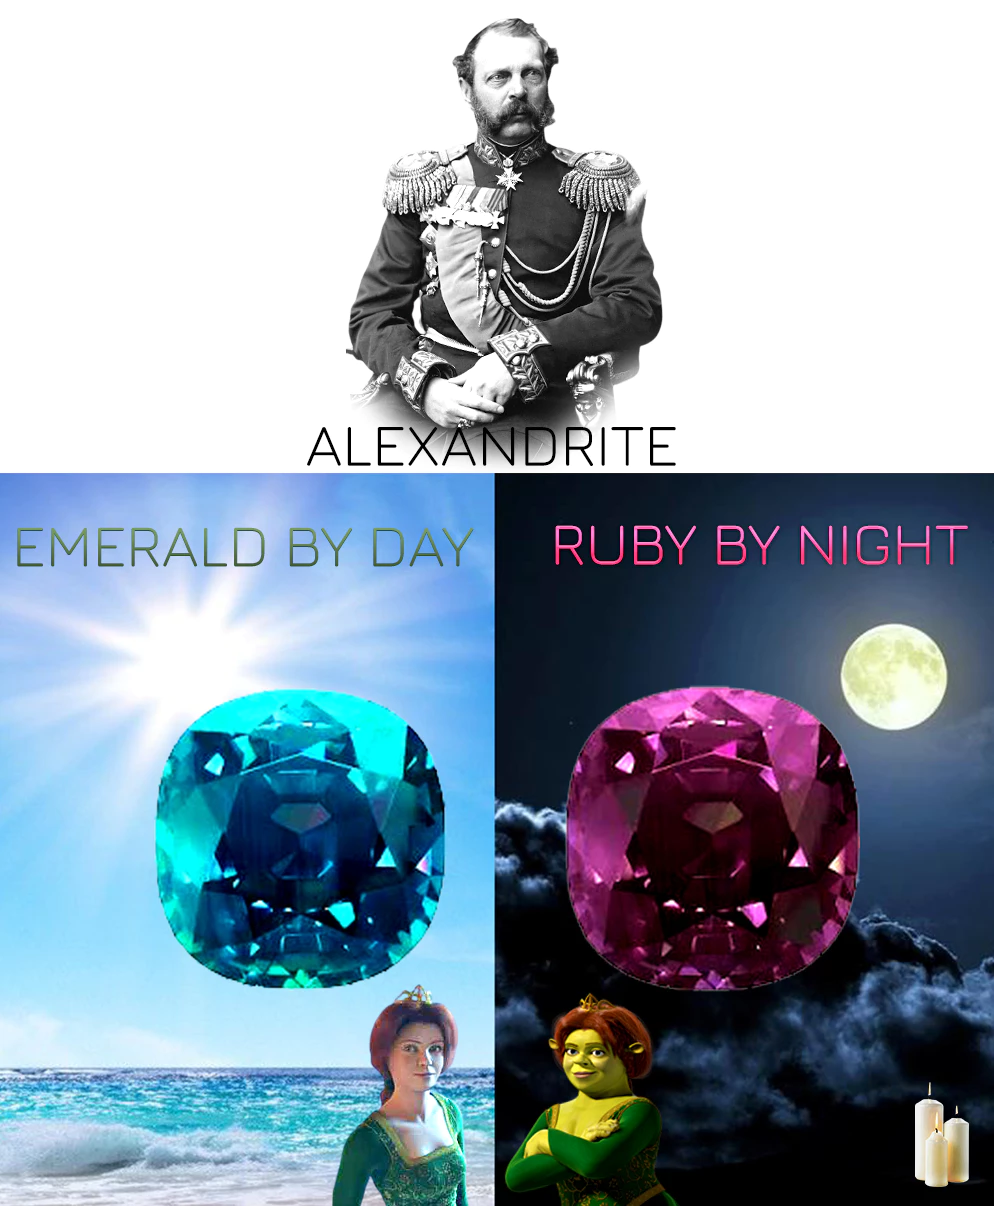 Alexandrite alexander II ruby by night emerald by day illustration